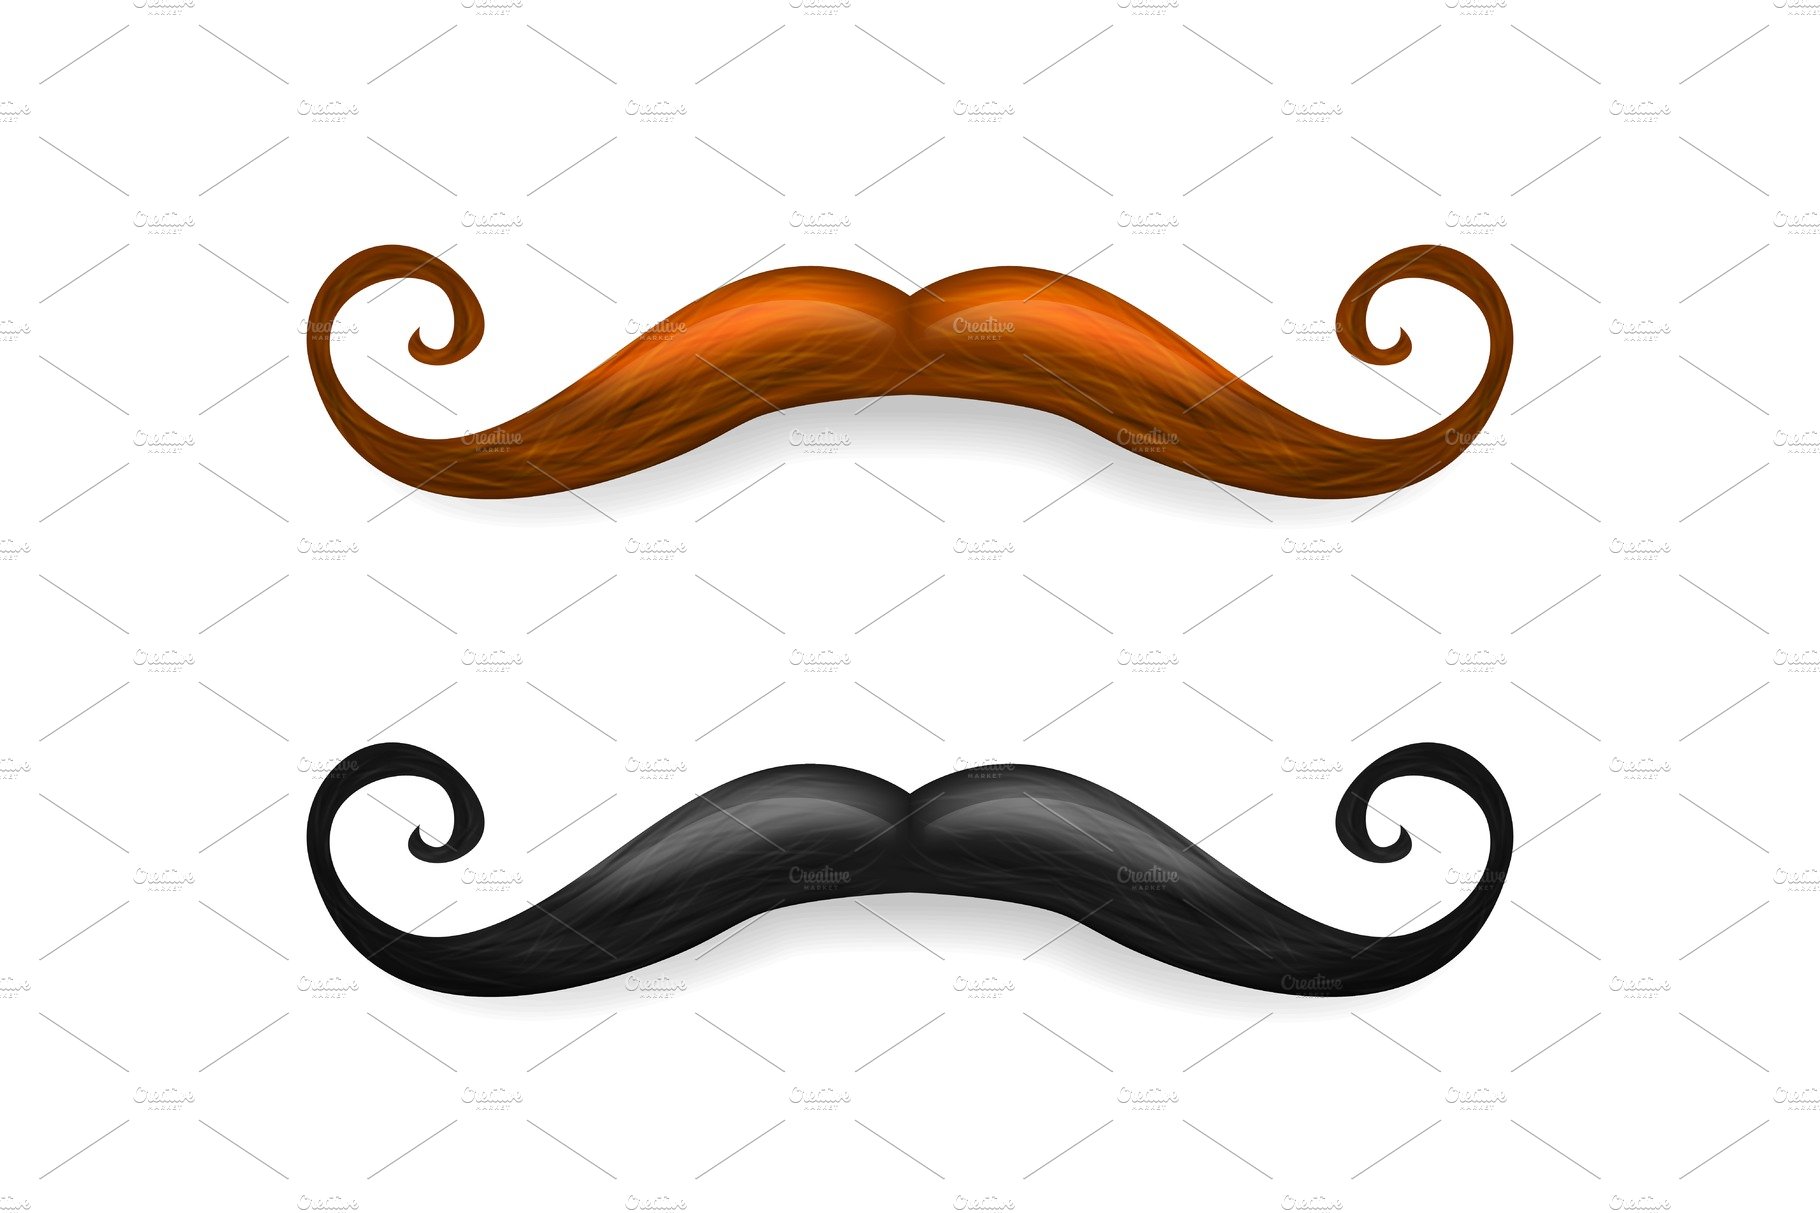 Mustache illustration. Vector brown cover image.